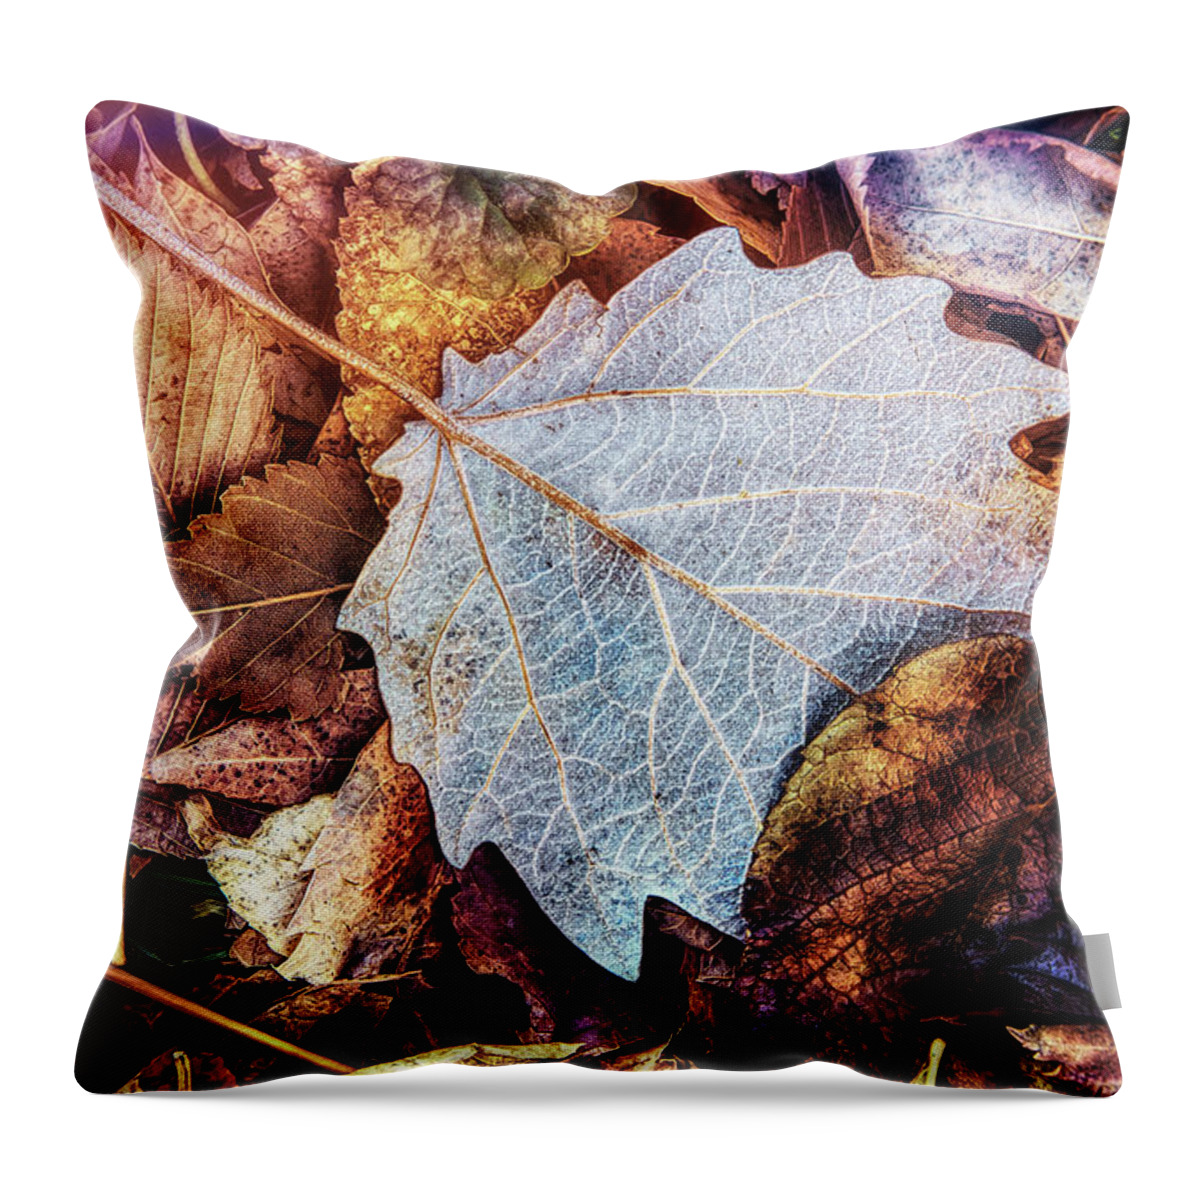 Bleached Throw Pillow featuring the photograph Winter Afternoon by Steve Sullivan